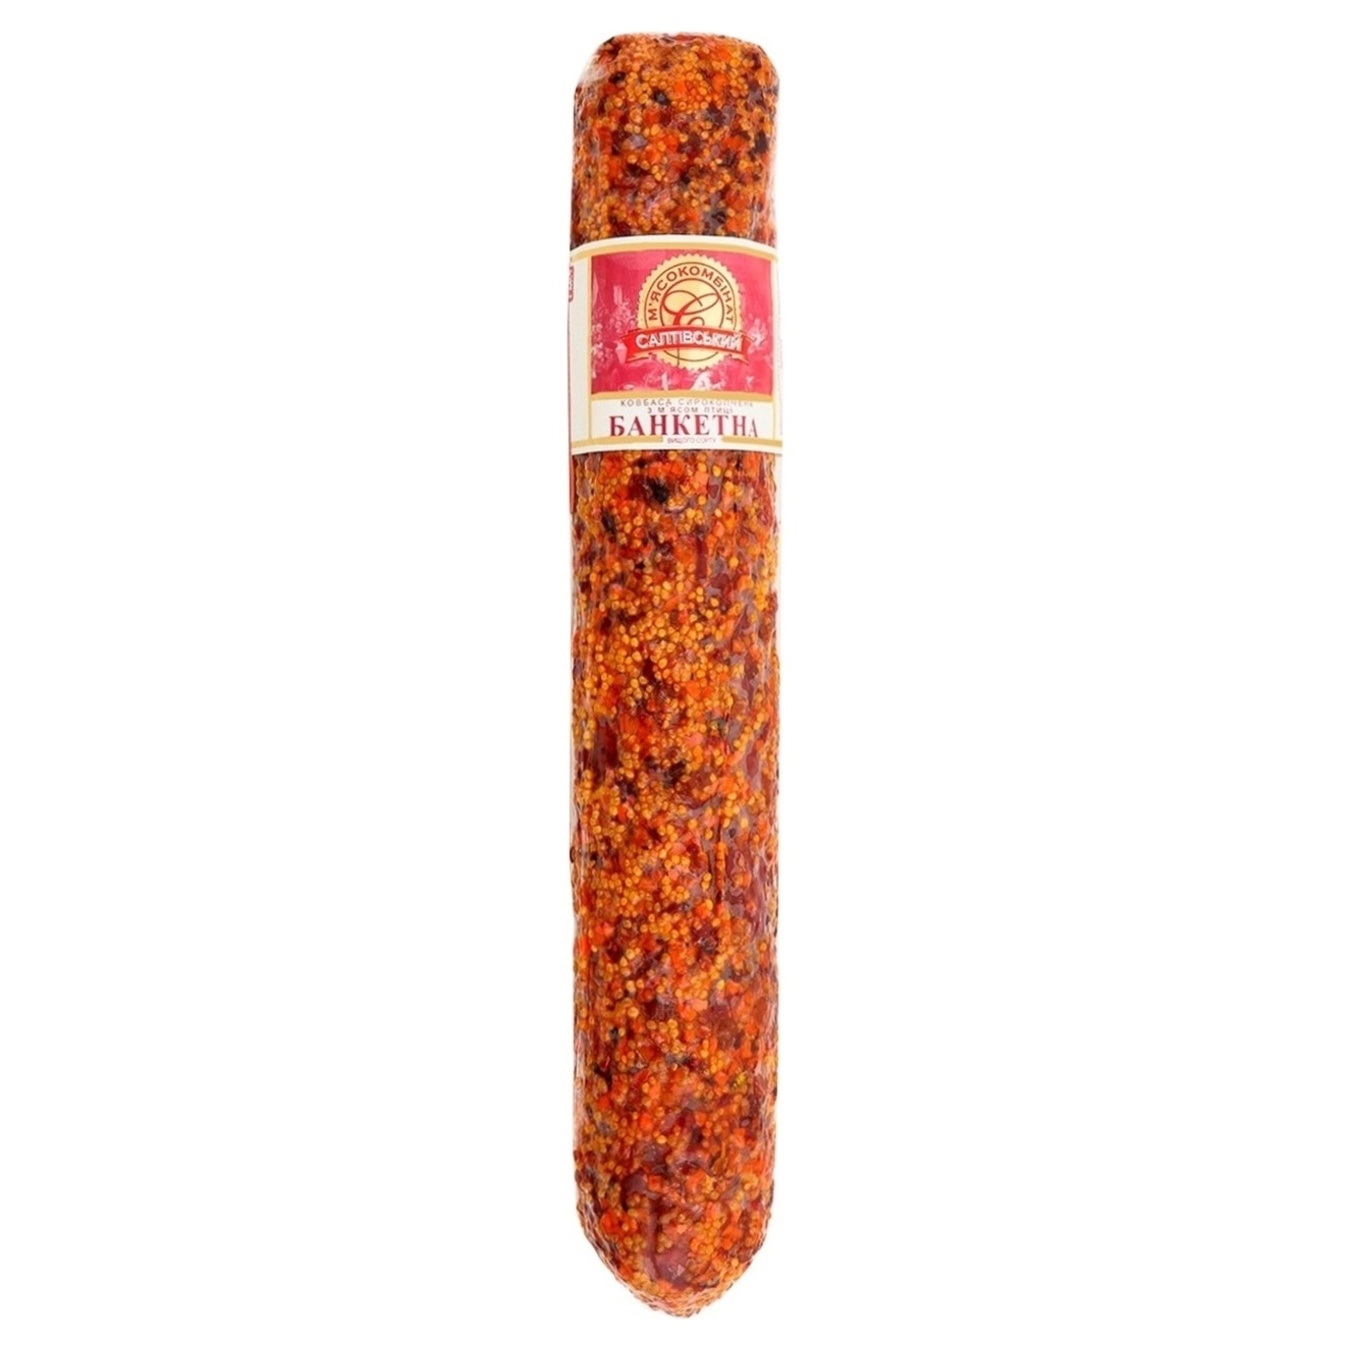 Sausage Banketna Saltivskyi MK, raw-smoked, the highest grade of weight